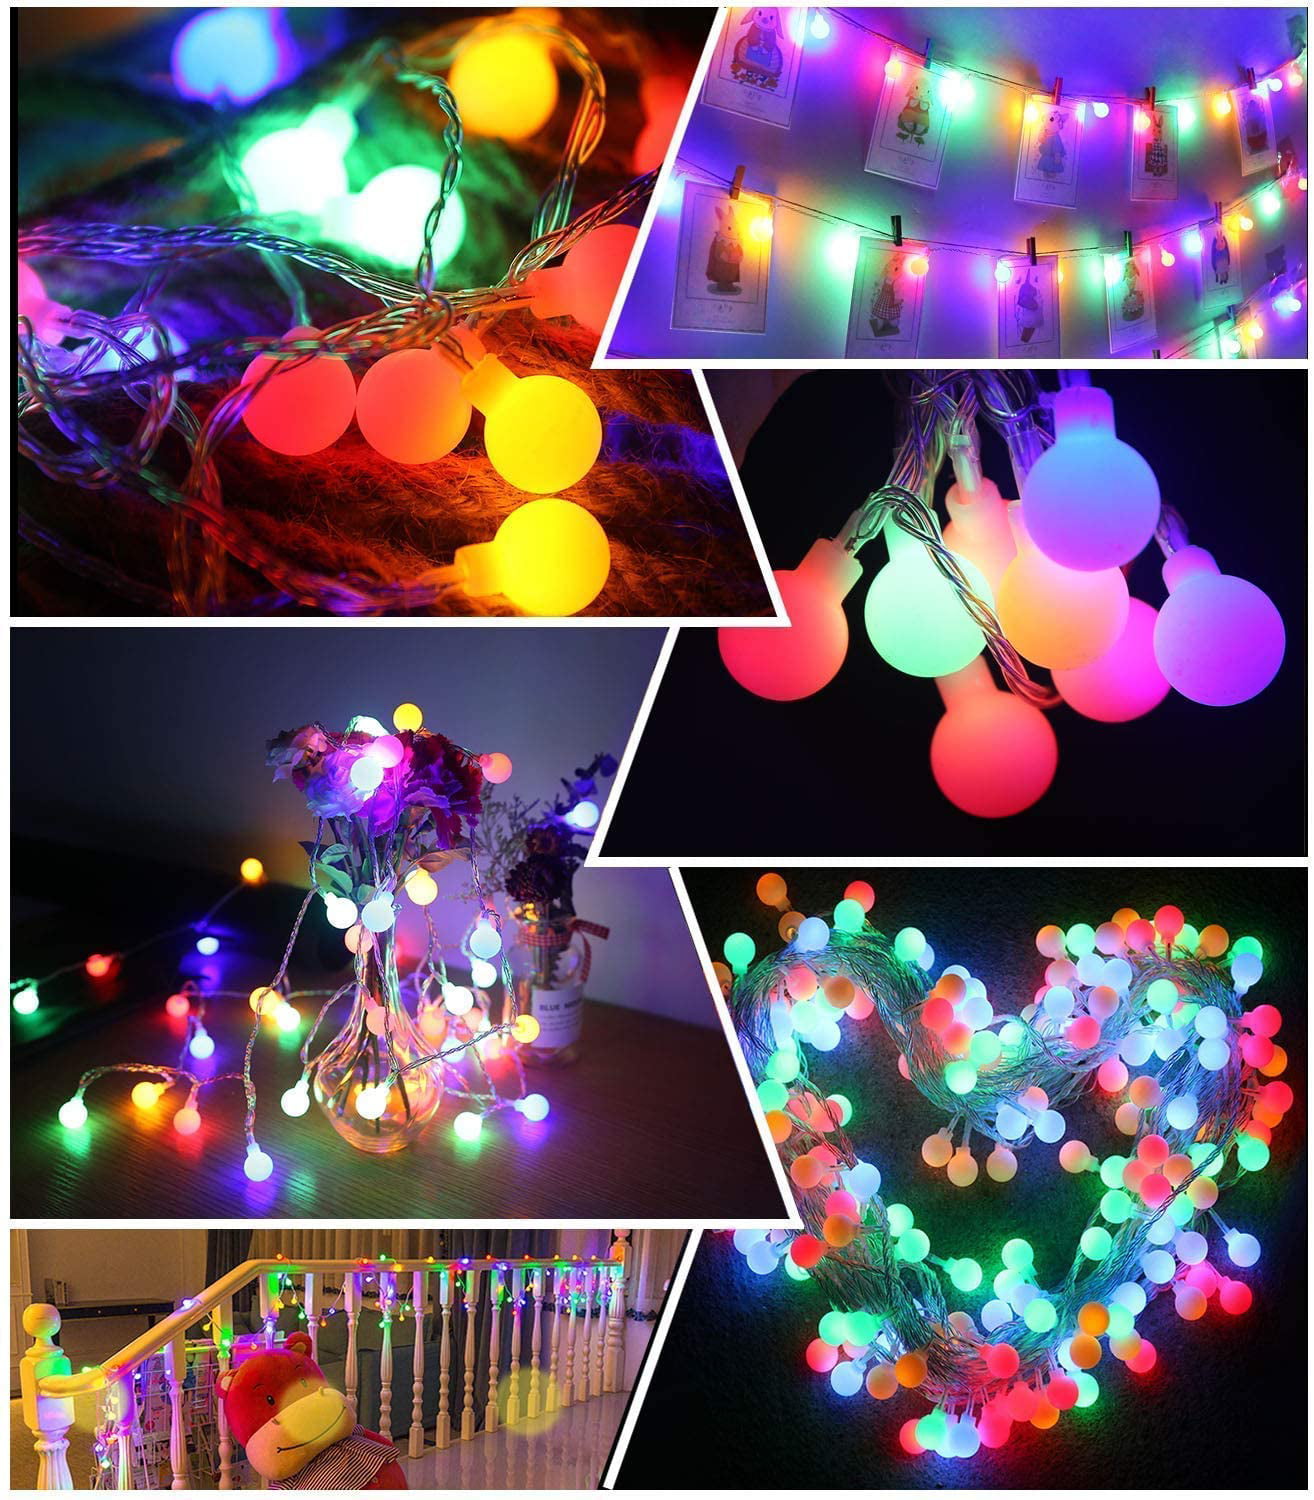 55ft 112 LEDs Colored Fairy Lights Waterproof UL Listed Plug in String Lights for Outdoor Indoor Bedroom Patio Garden Party Wedding Patio Christmas Xmas Tree Decoration MIBOTE Globe String Lights 